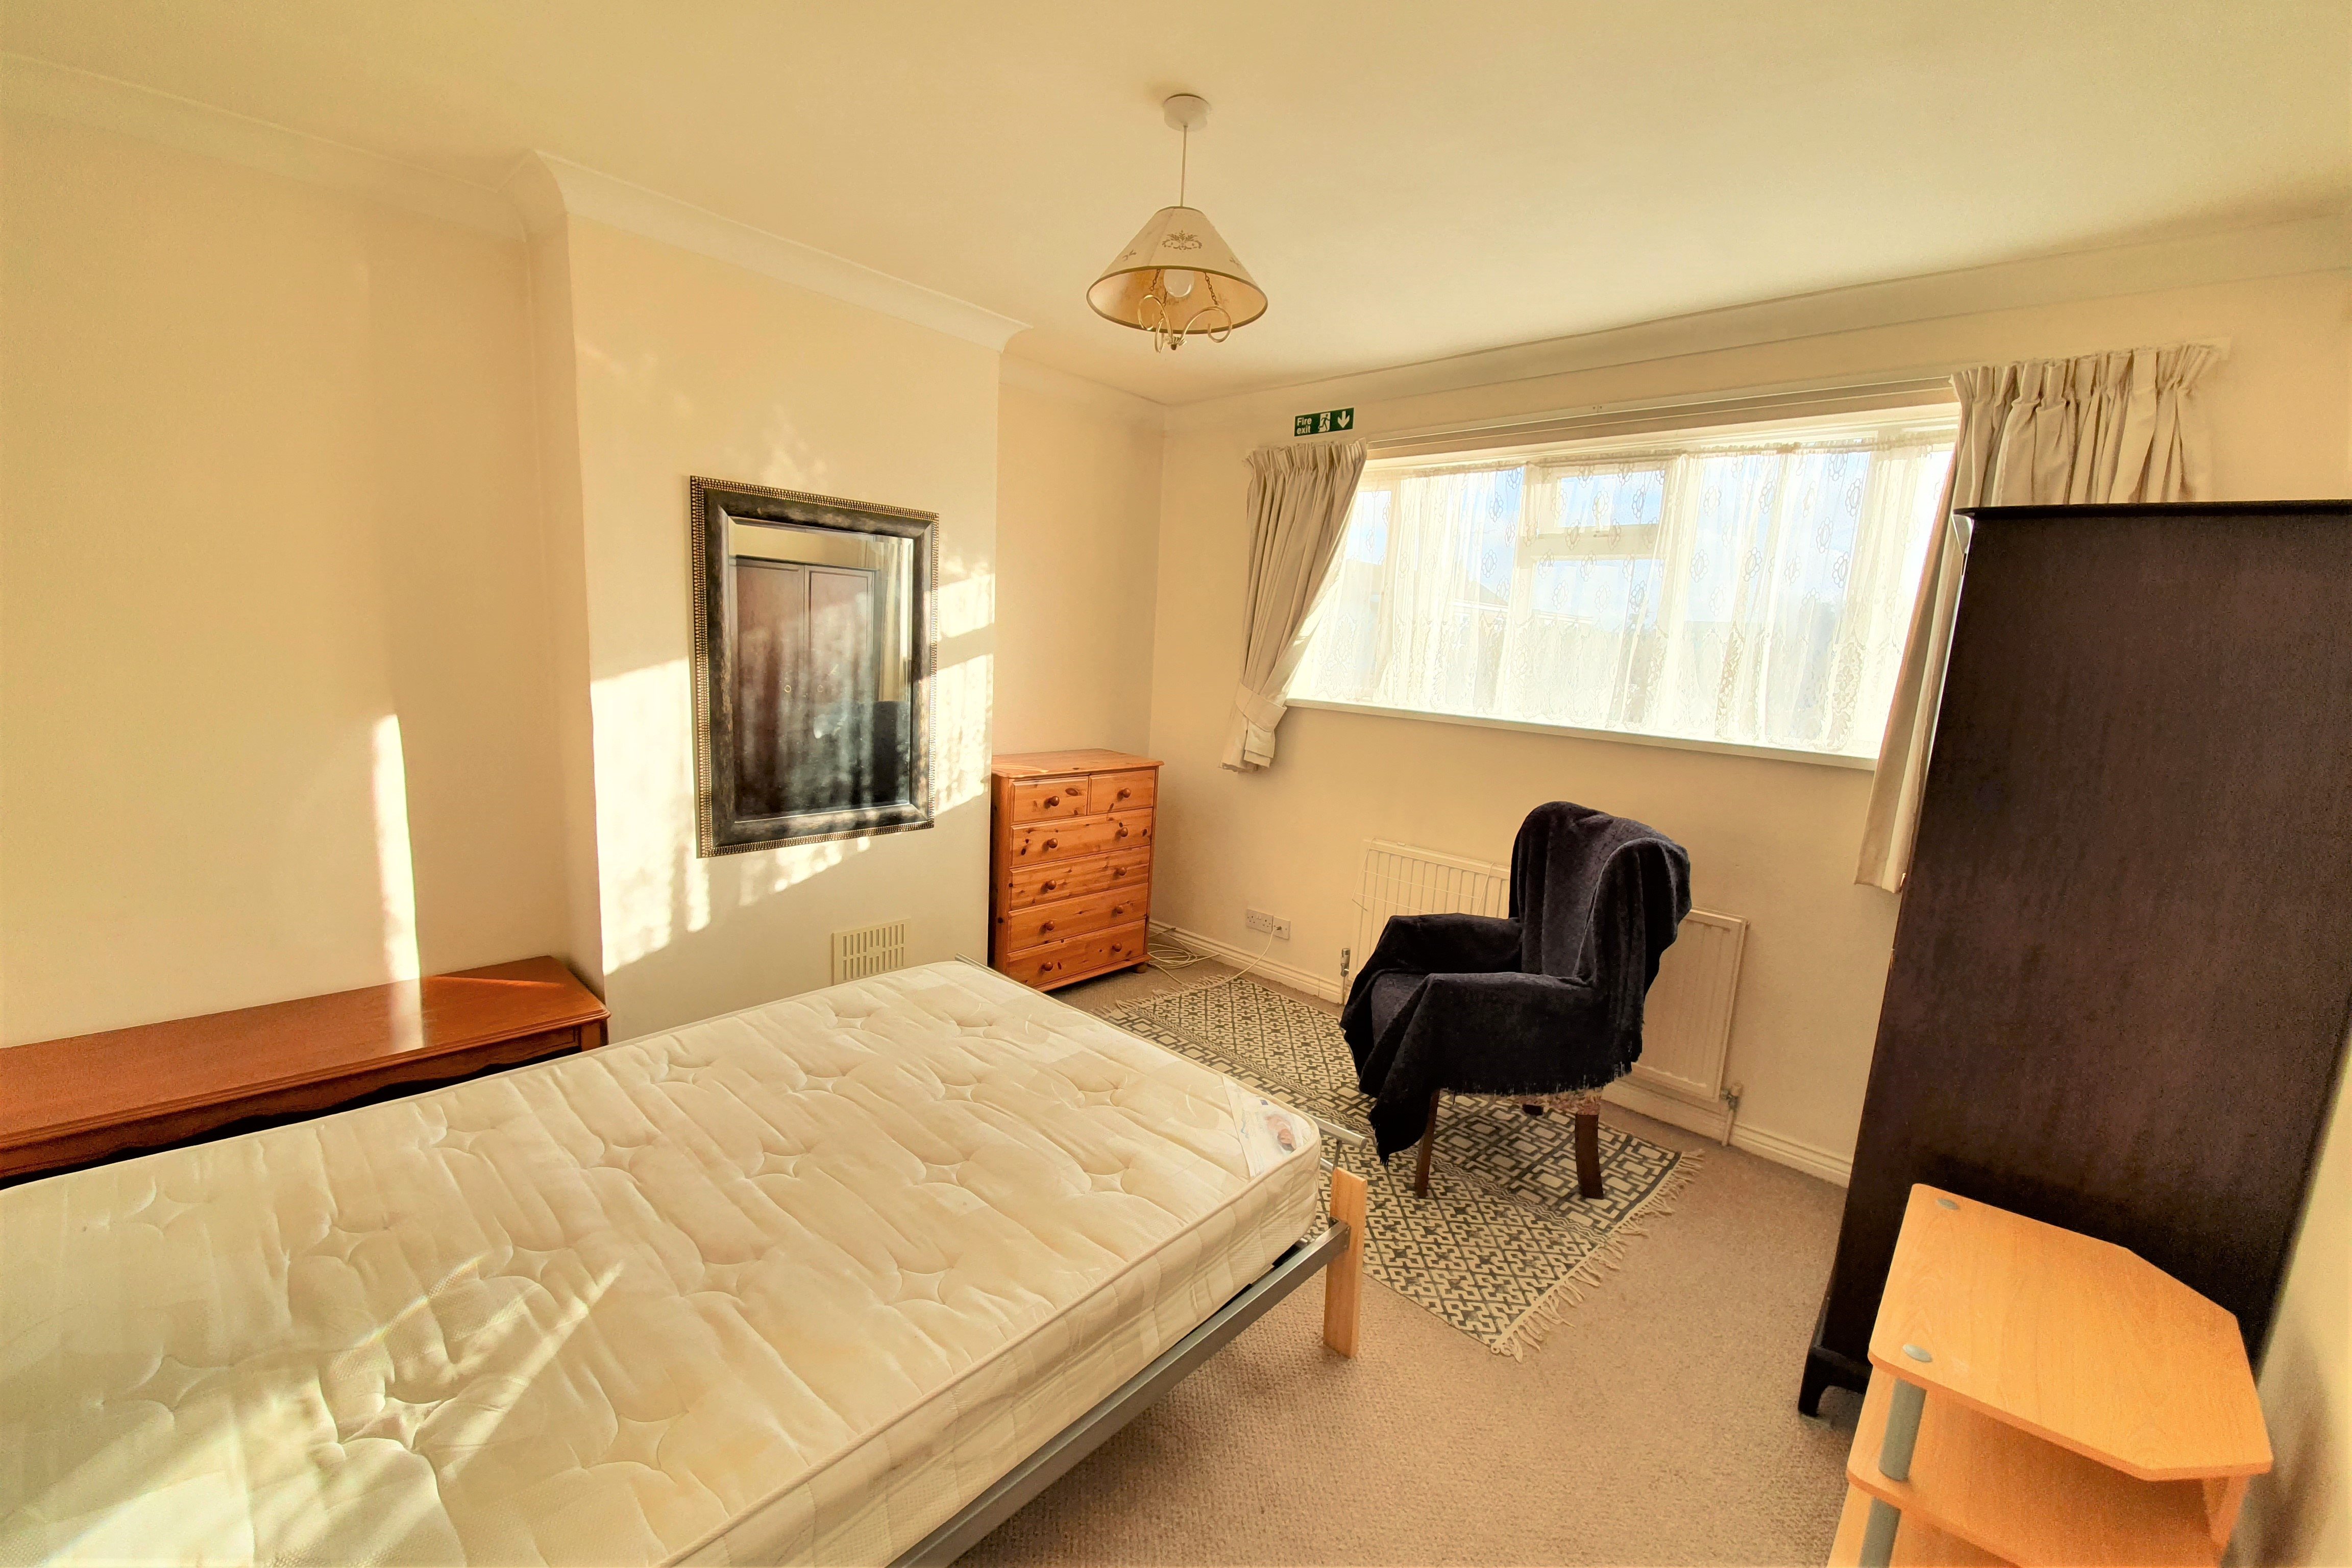 1 bed house / flat share to rent in Church Road (Bedroom 4), Rayleigh  - Property Image 1